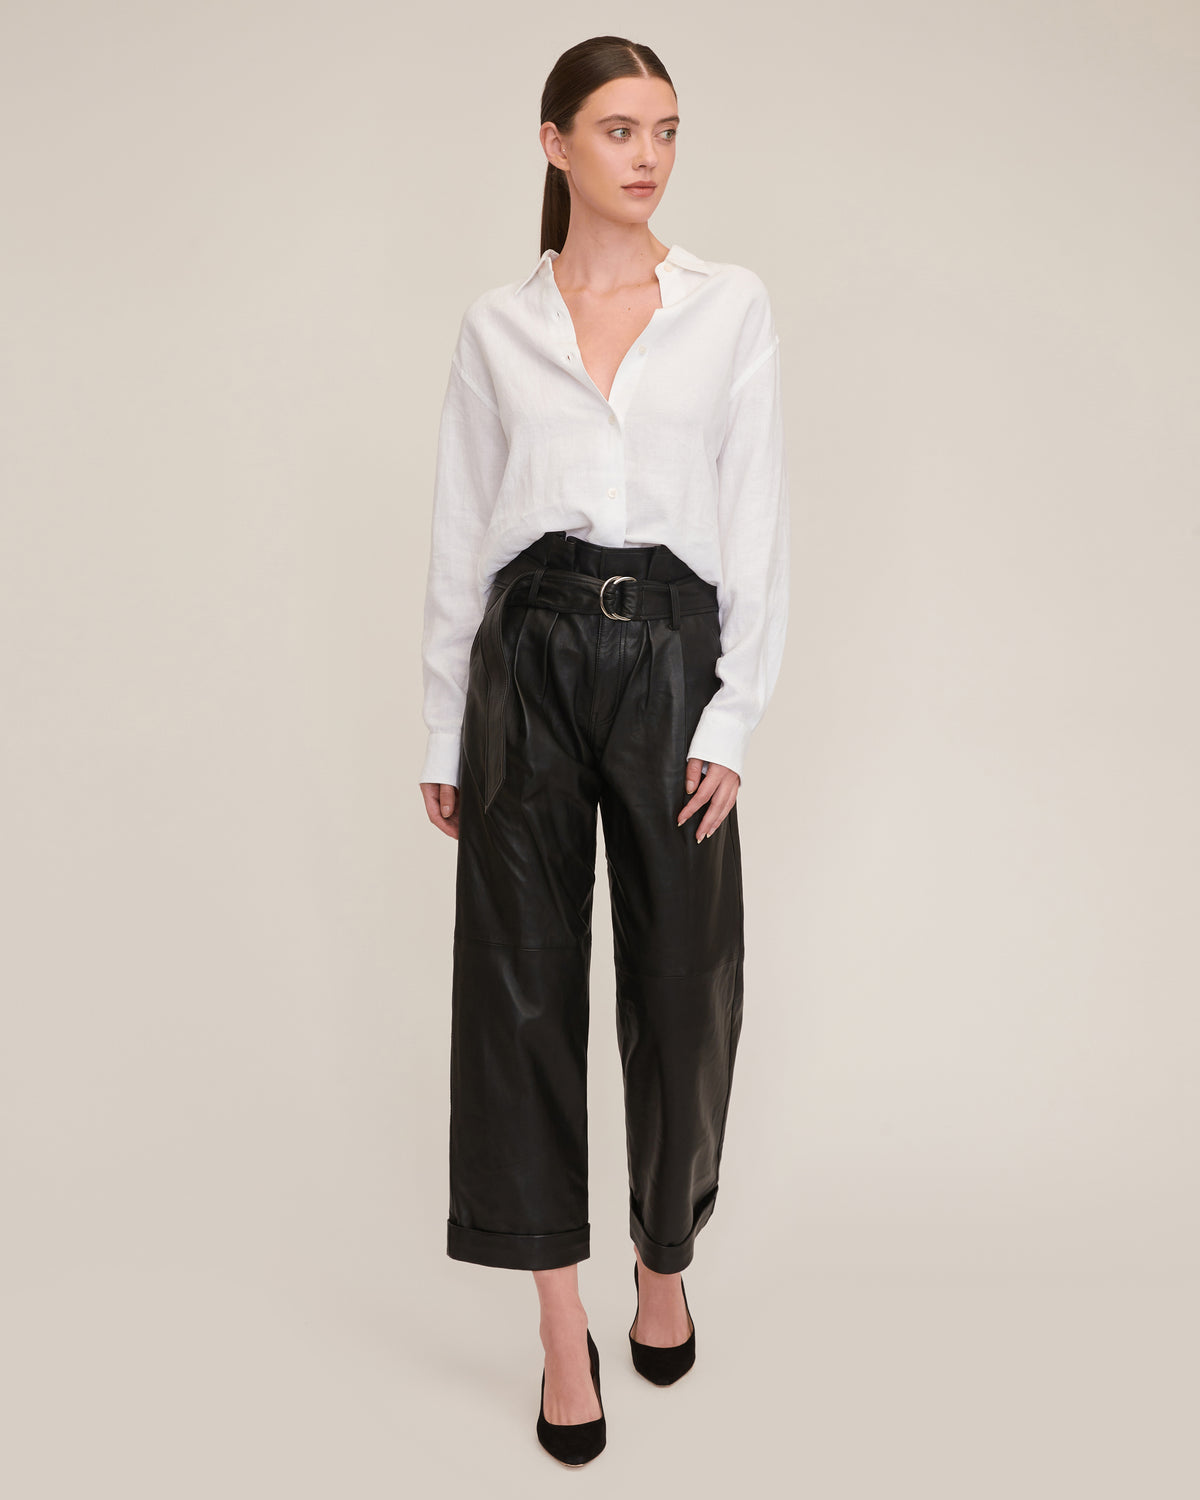 Dixon Leather Paper Bag Cropped Pant in Black